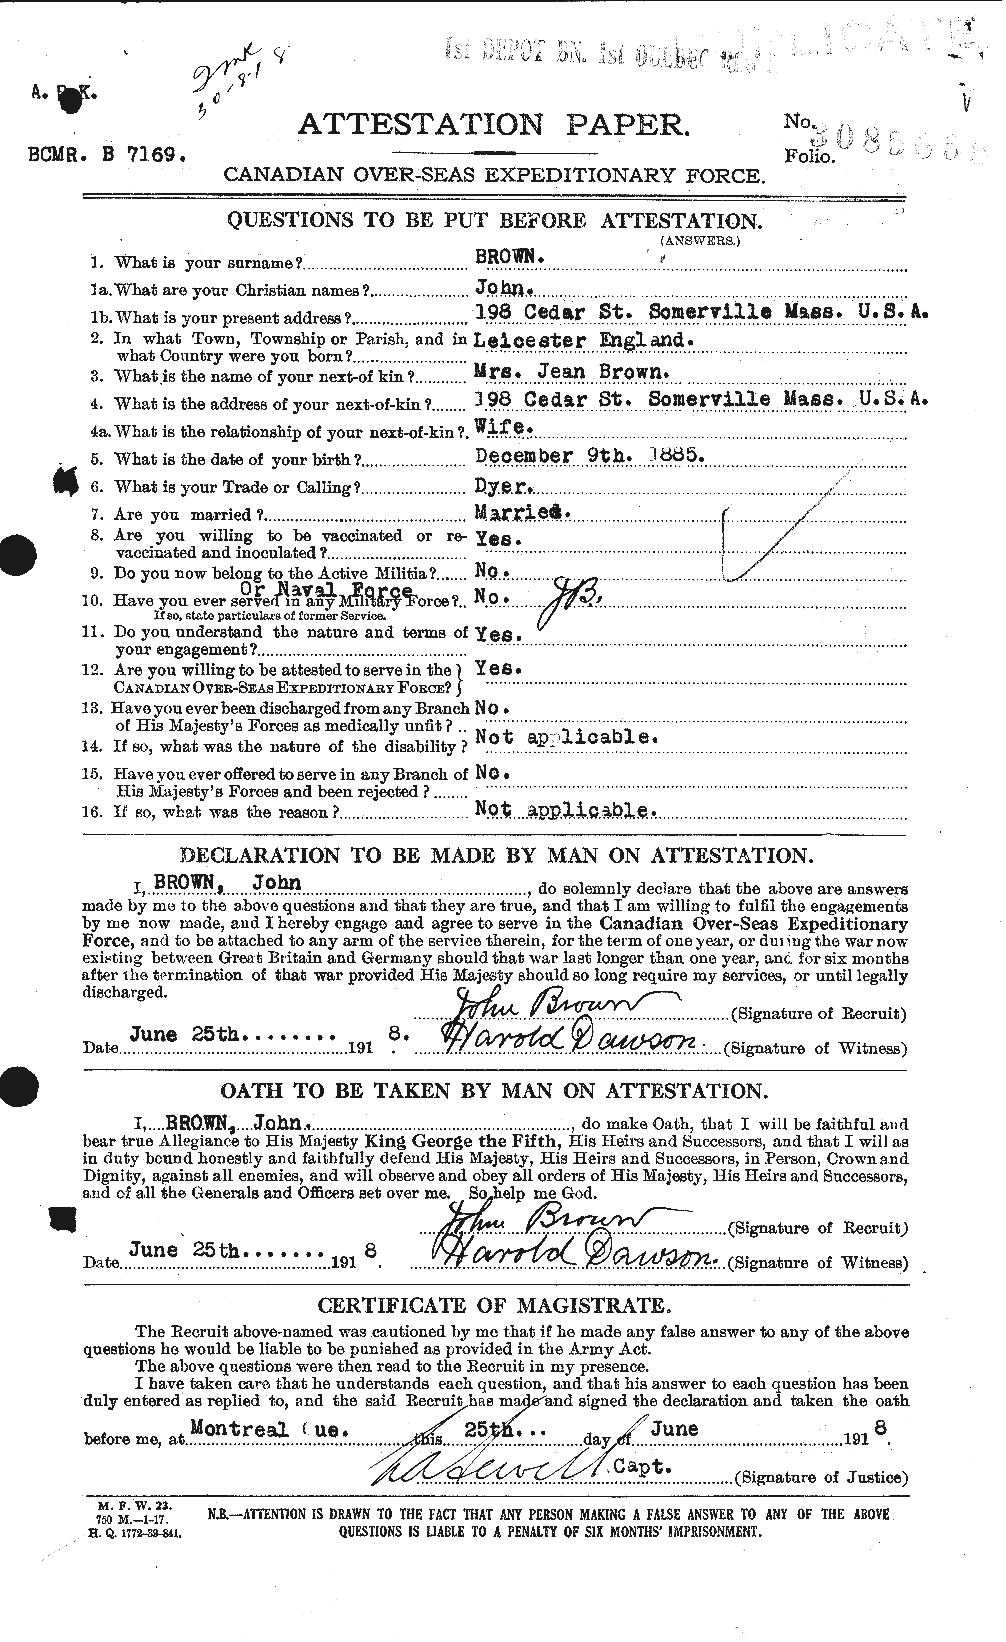 Personnel Records of the First World War - CEF 263877a